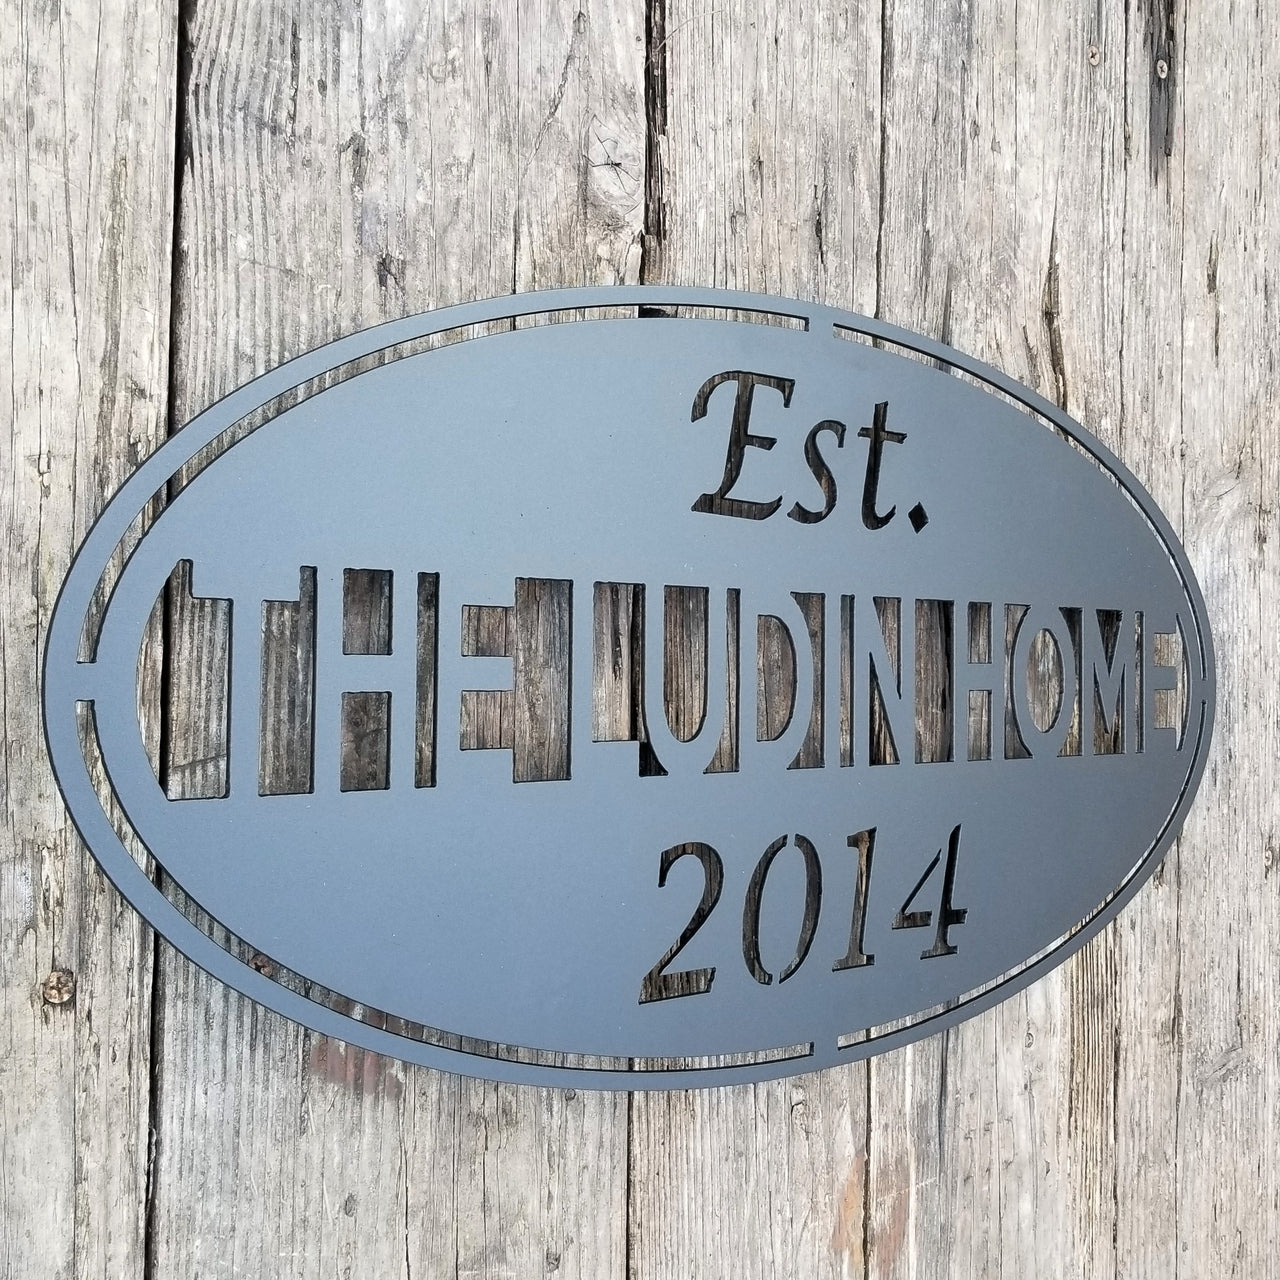 This classic Name and date sign powder coated black and reads, " The Ludin Home Est. 2014"